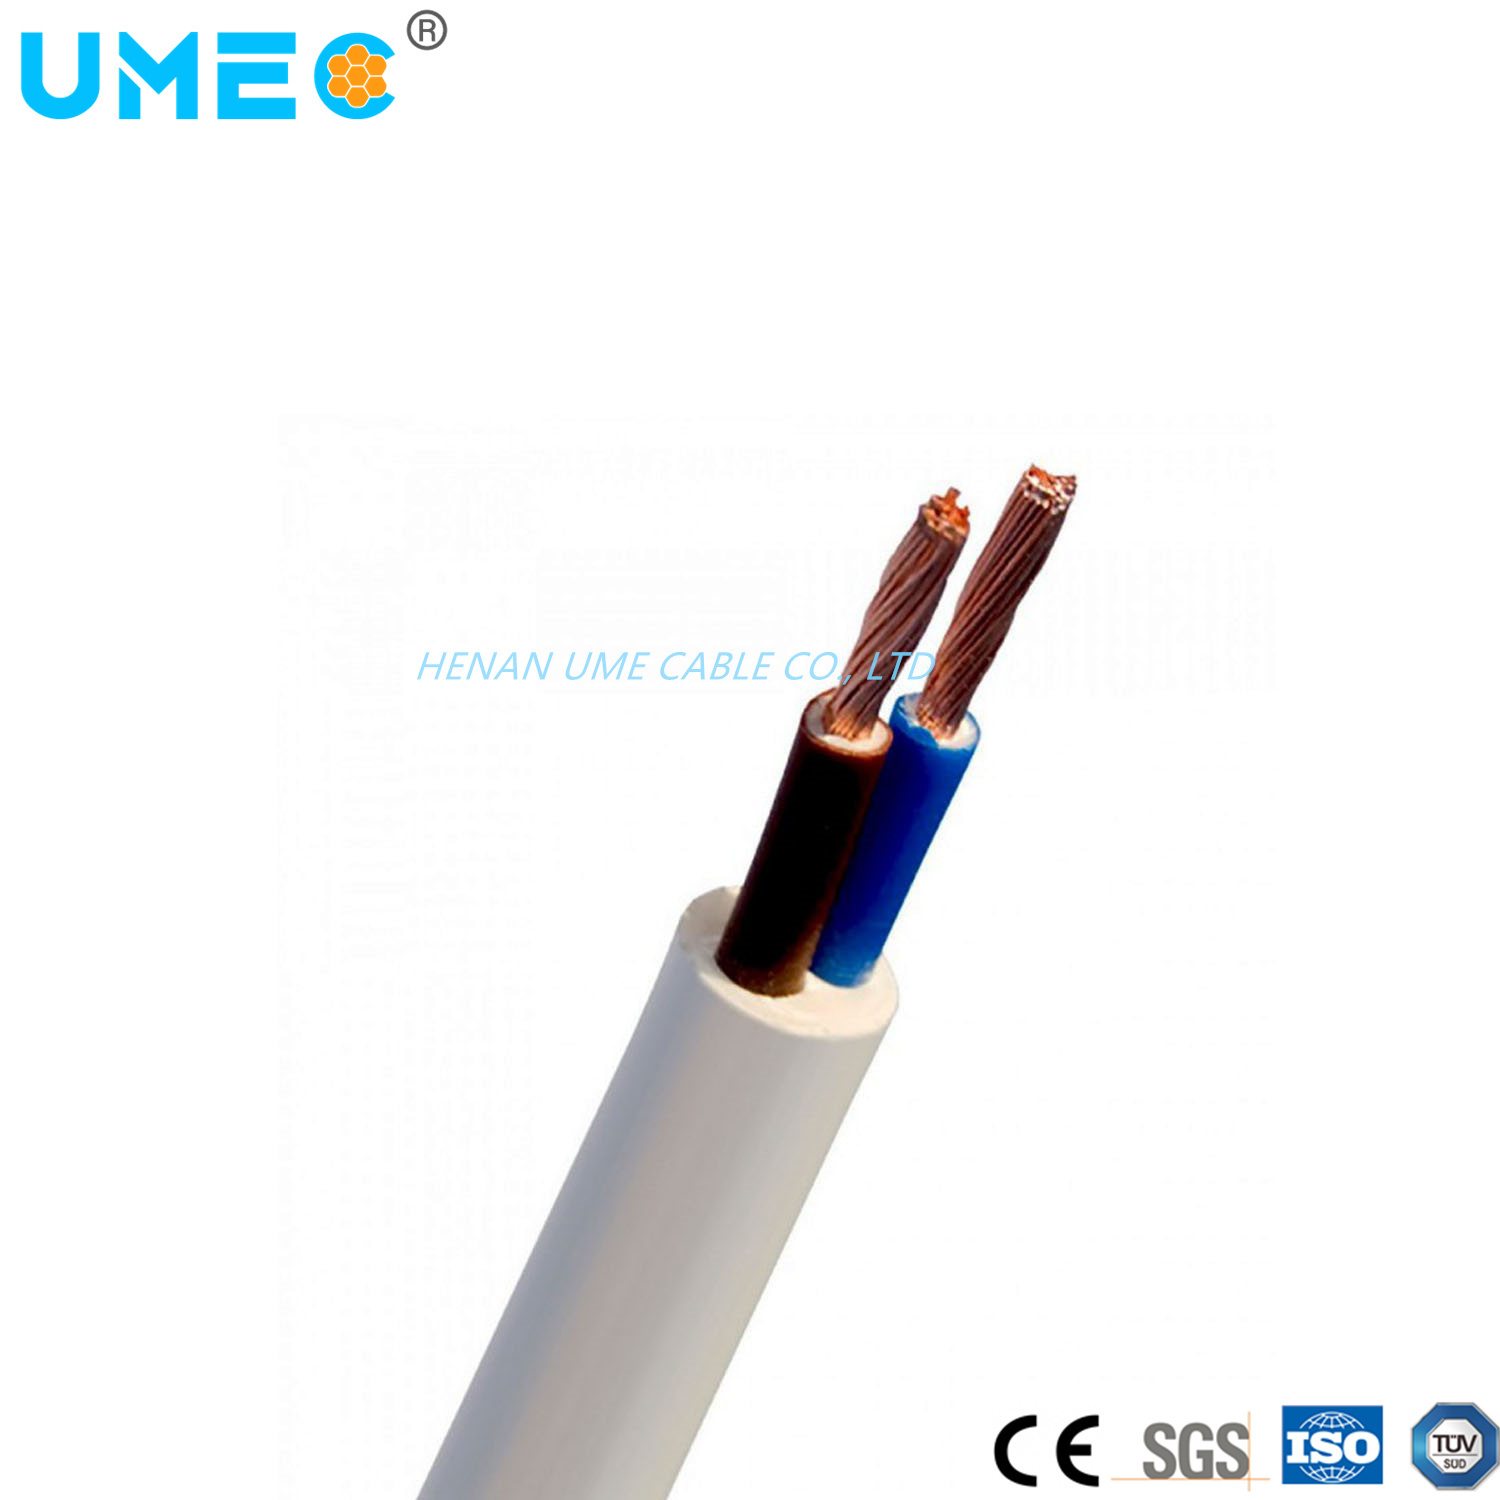 300/500V H05VV-F Power Cable PVC Sheath 0.3 0.5 0.75 1.0 1.5 2.5 4.0mm2 Copper Cable